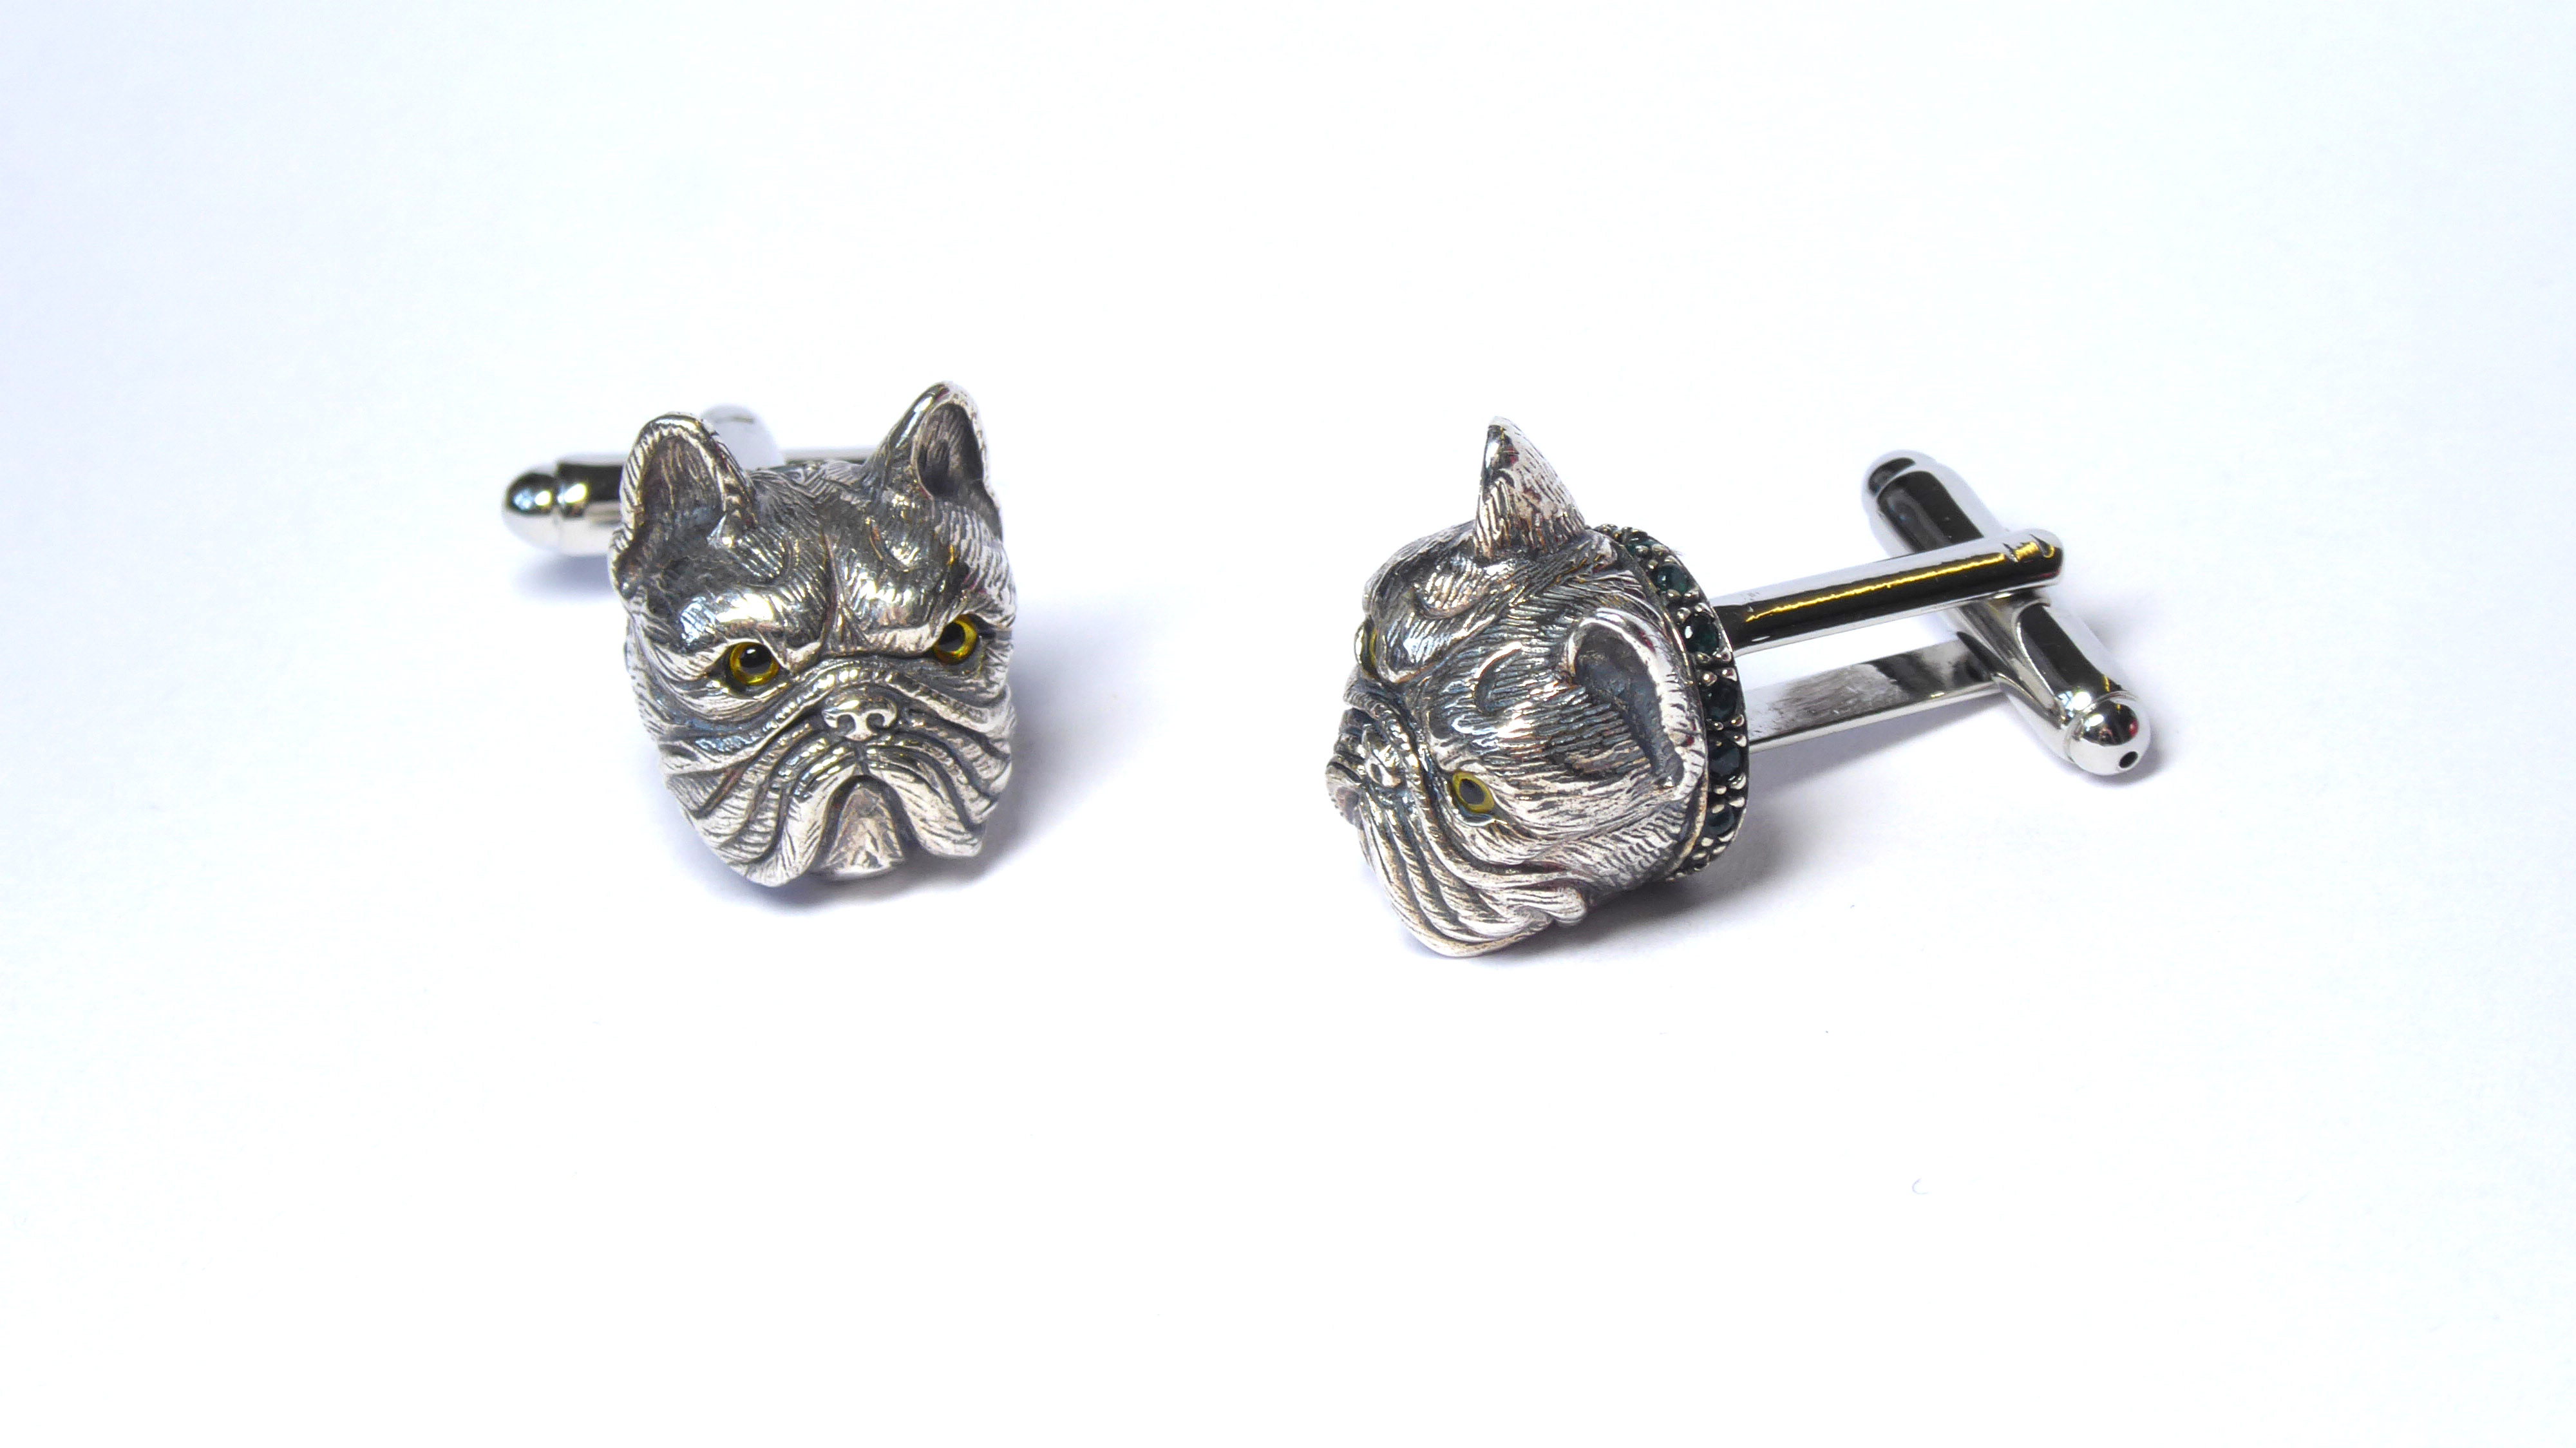 A PAIR OF SILVER NOVELTY FRENCH BULLDOG CUFFLINKS Set with glass eyes and emerald set collar. (